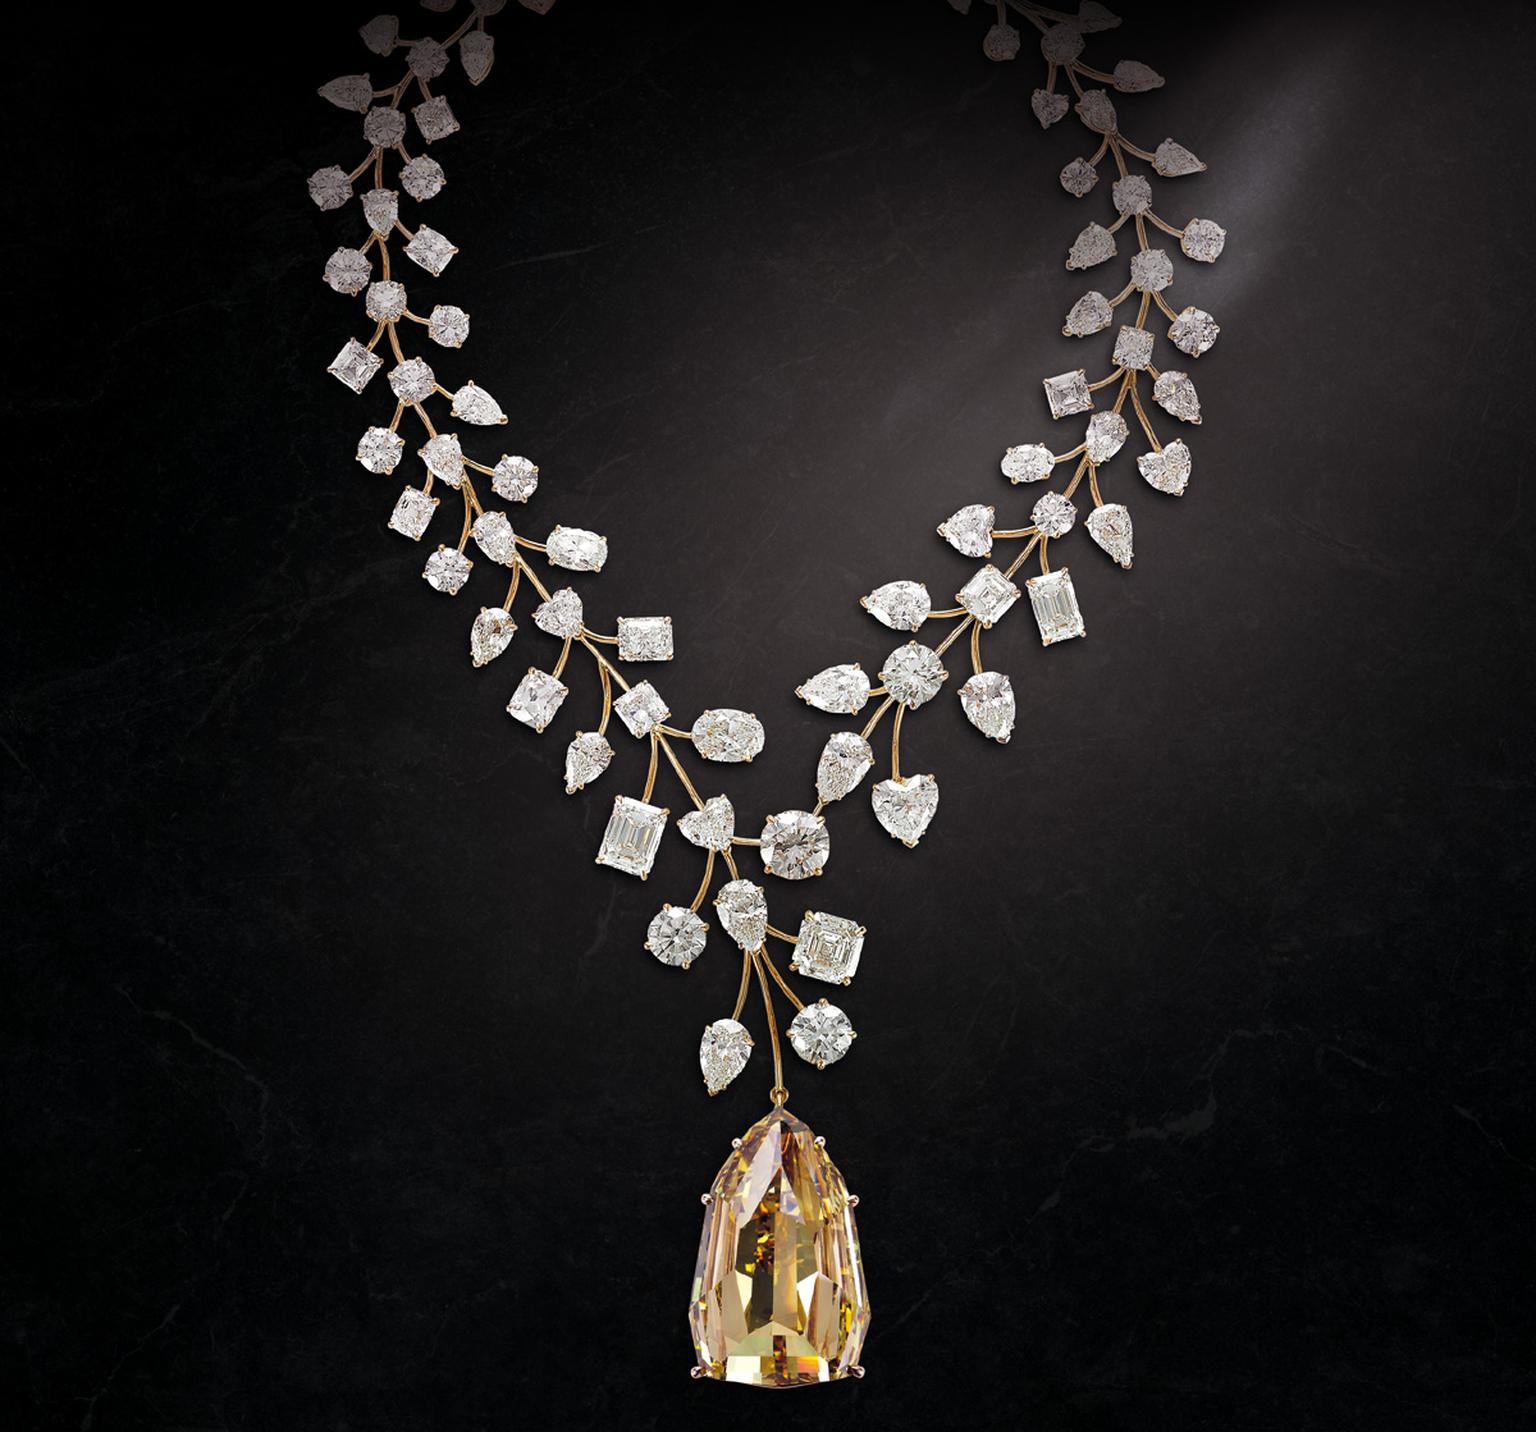 Sotheby's Showcase: An Important Fancy Vivid Yellow and Fancy Yellow  diamond necklace | Luxury Week | Sotheby's